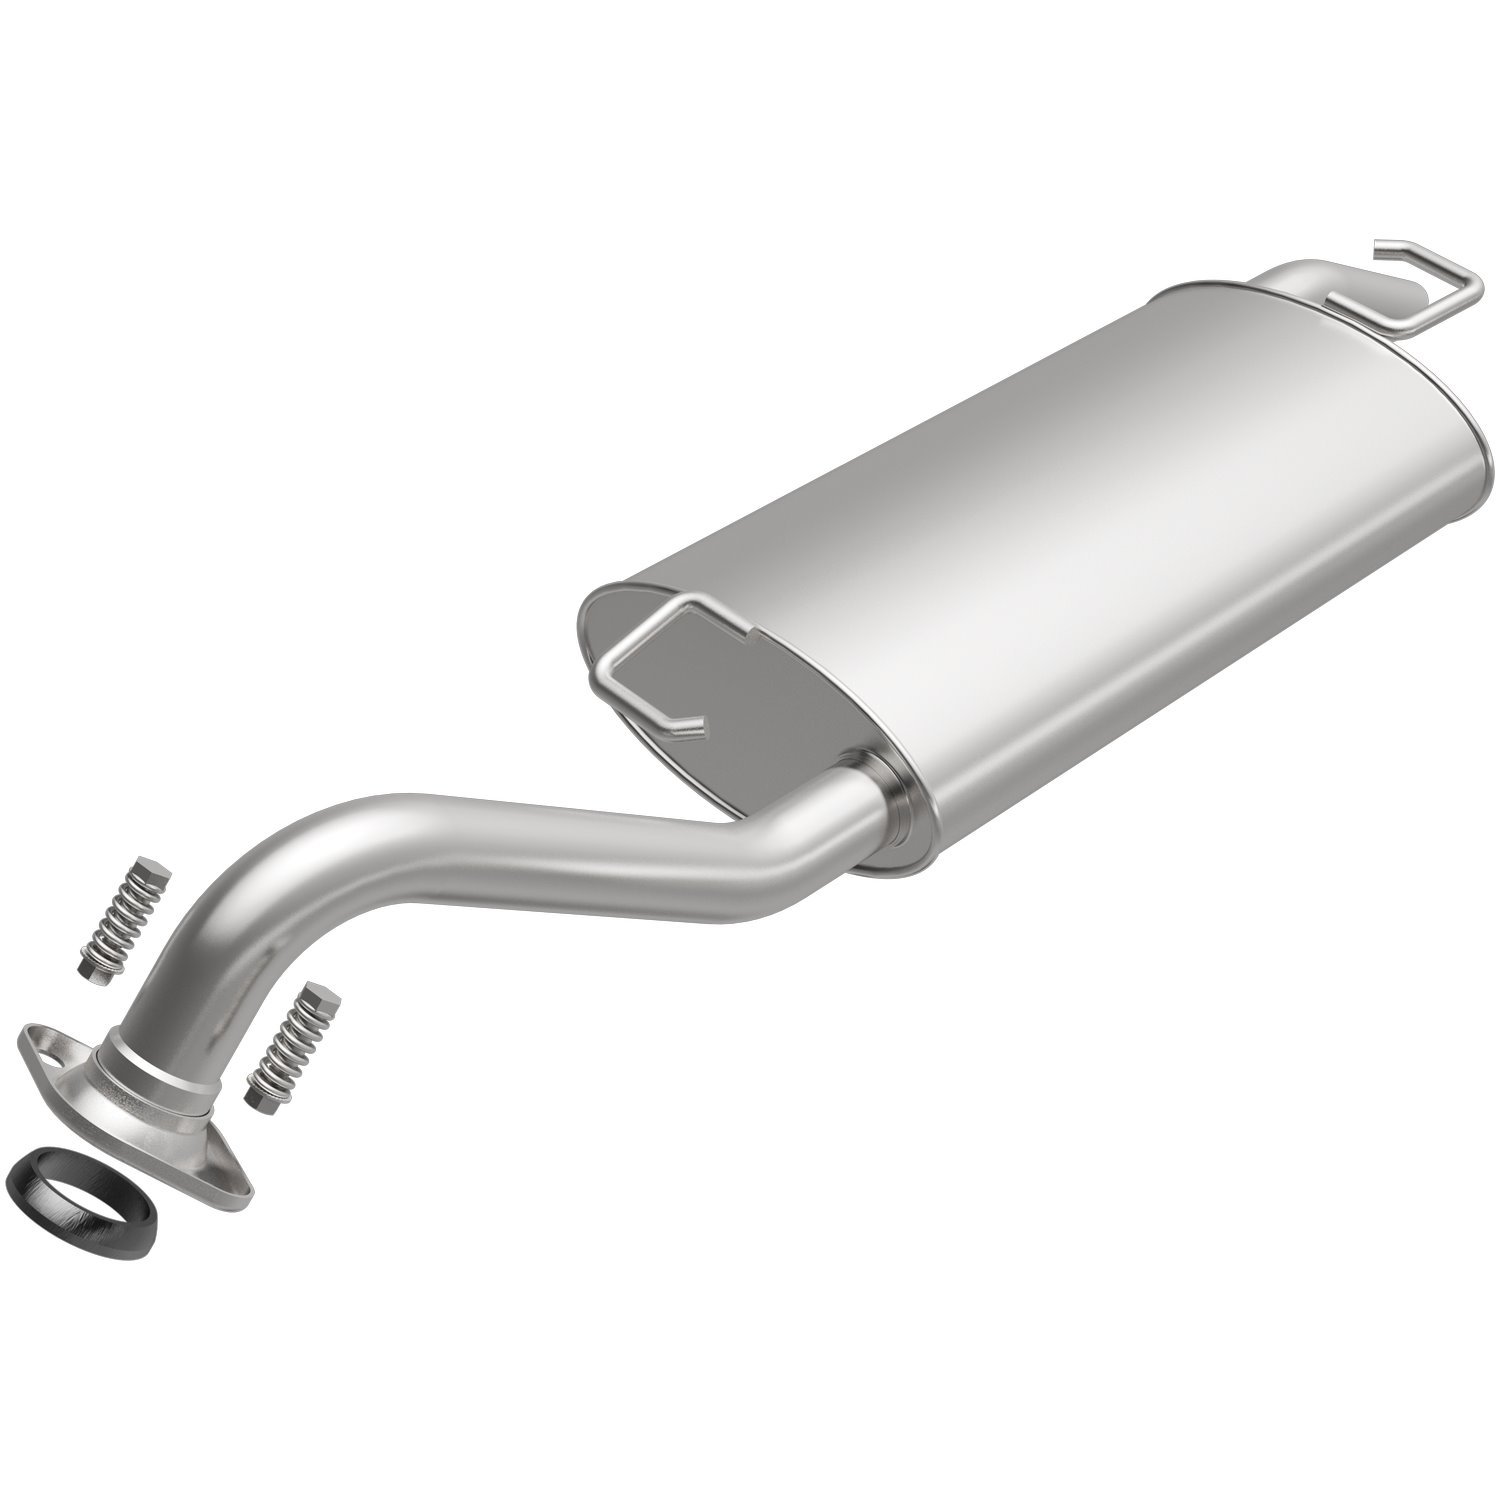 Direct-Fit Exhaust Kit, 2005-2008 Toyota Corolla 1.8L